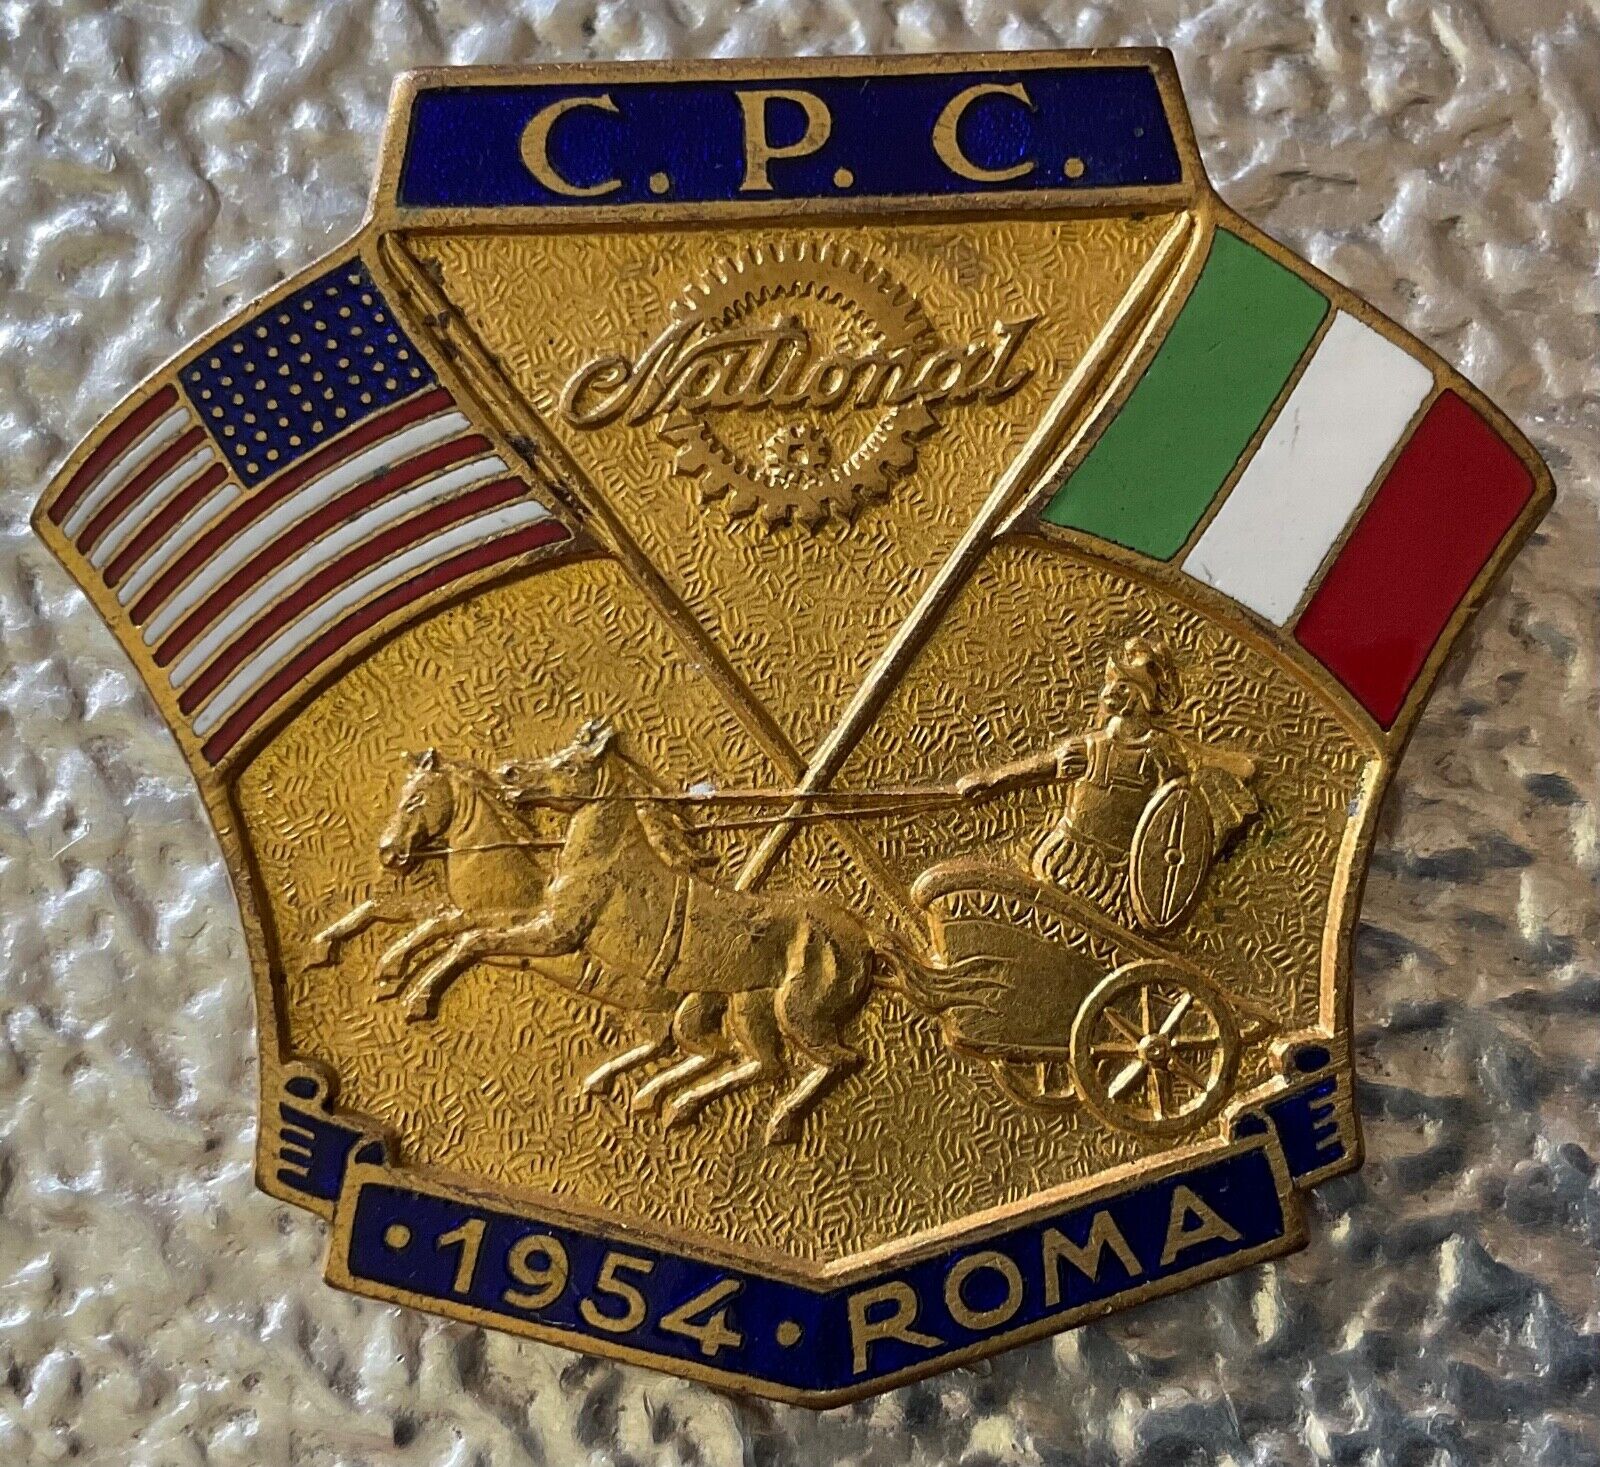 RARE 1950s NCR CORP,C.P.C NATIONAL ROMA 1954 ENAMELLED BADGE.U.S.A,ITALY FLAG